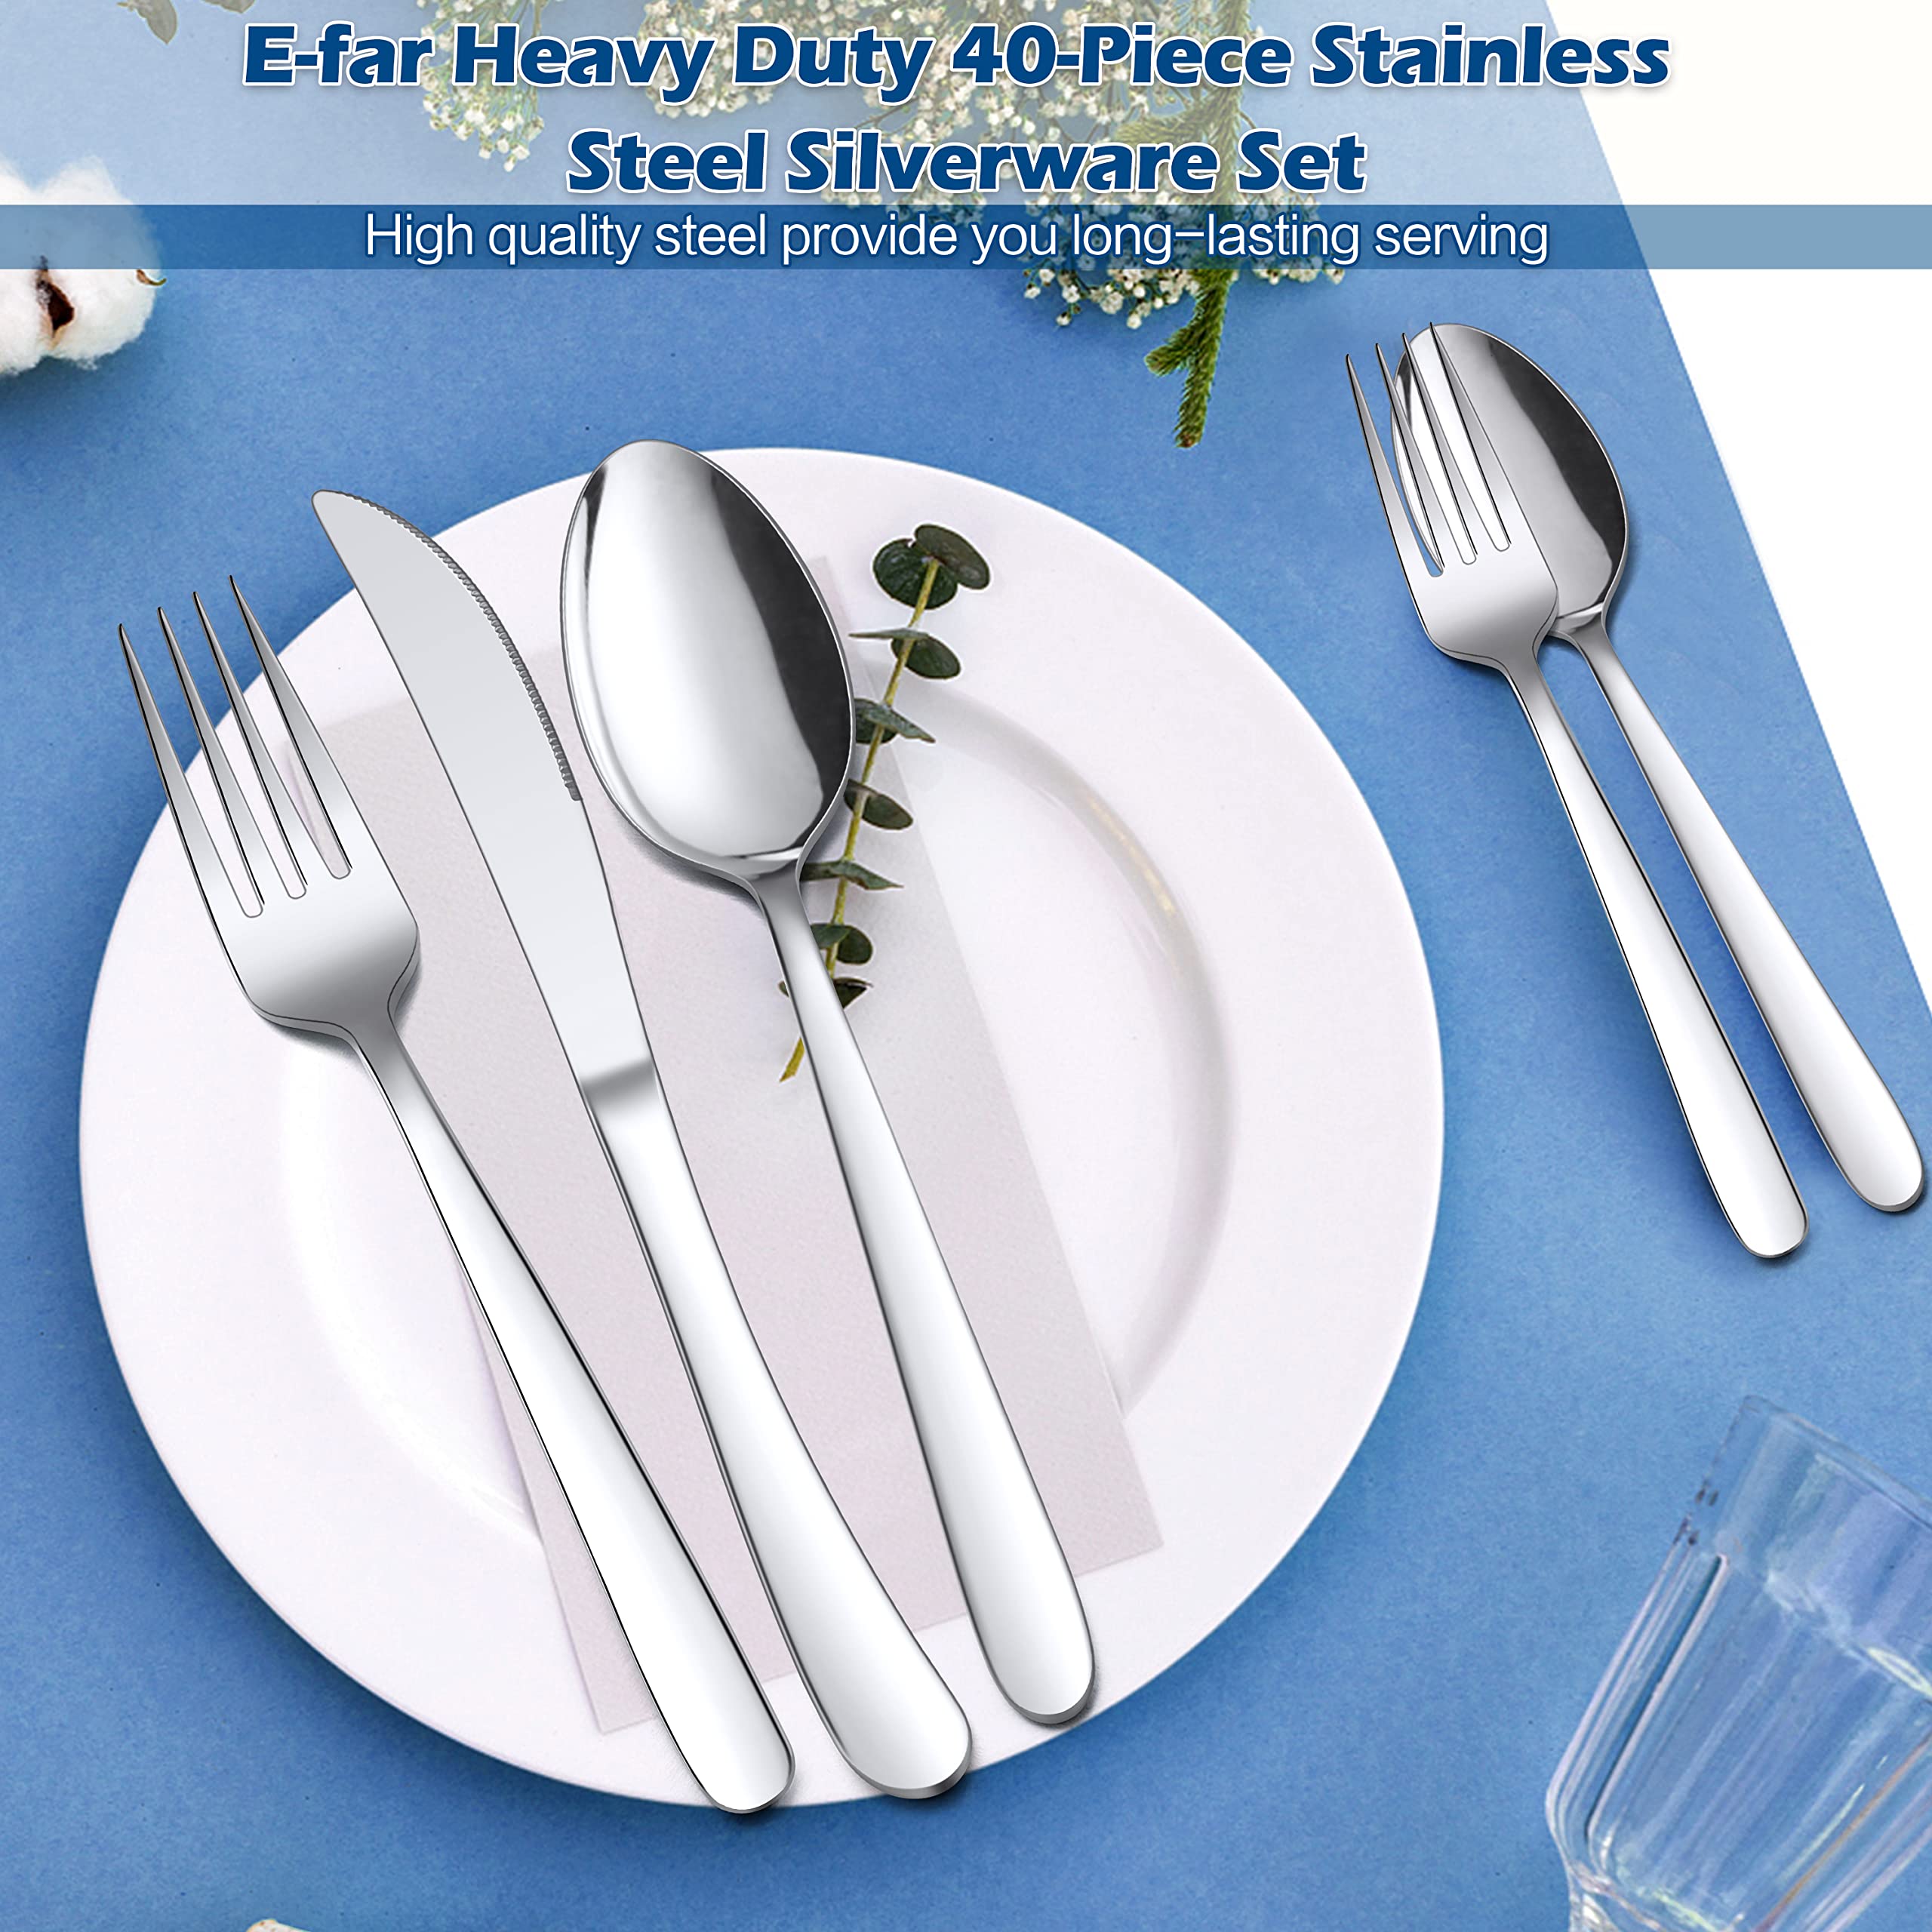 E-far Heavy Duty Silverware Set for 8, 40-Piece Stainless Steel Flatware Cutlery Set, Heavy Weight Metal Eating Utensils Sets for Home Restaurant Weddings, Mirror Polished & Dishwasher Safe